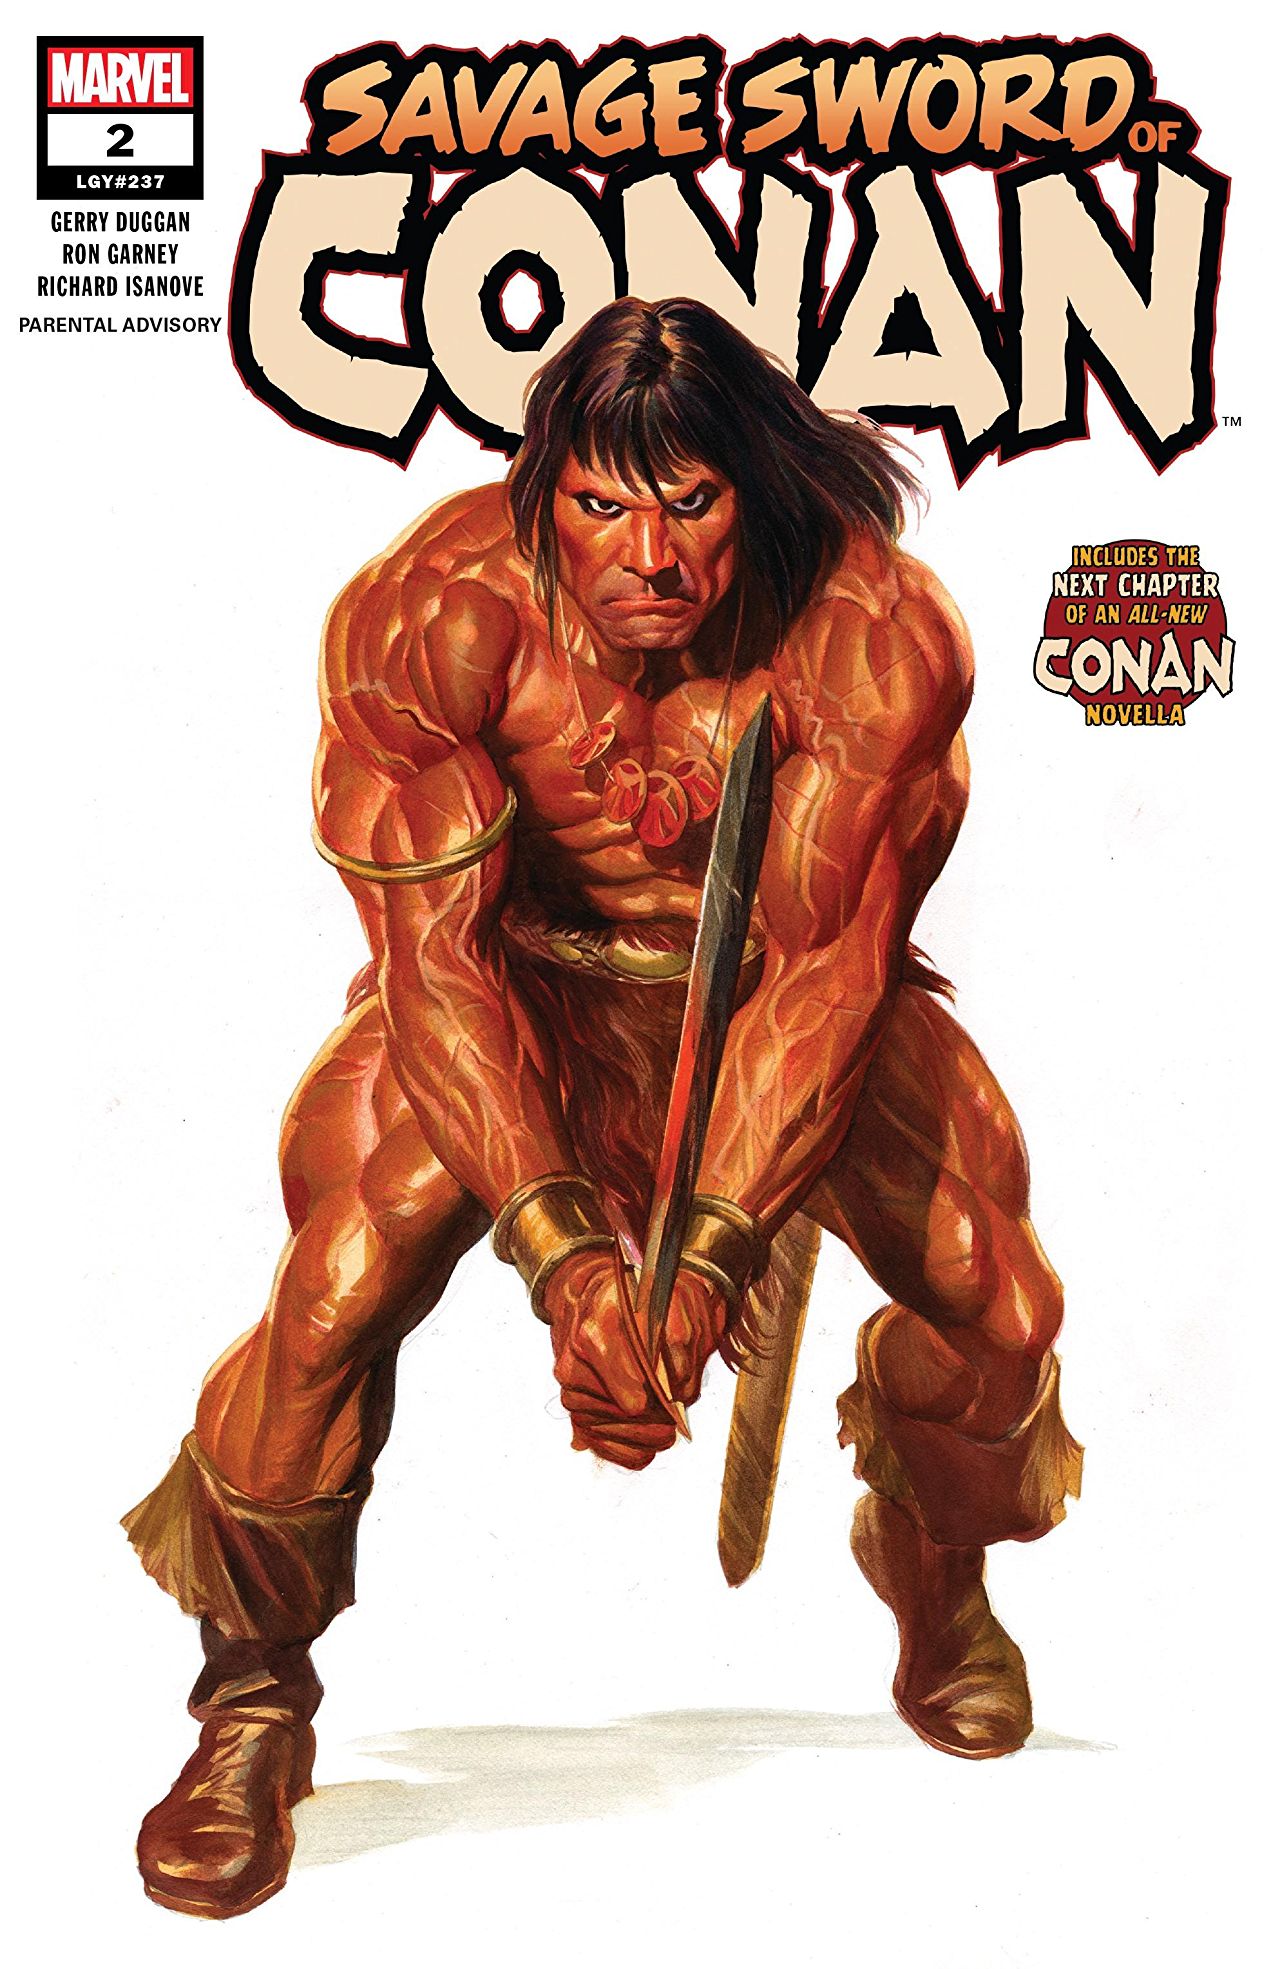 Marvel Preview: Savage Sword of Conan #2